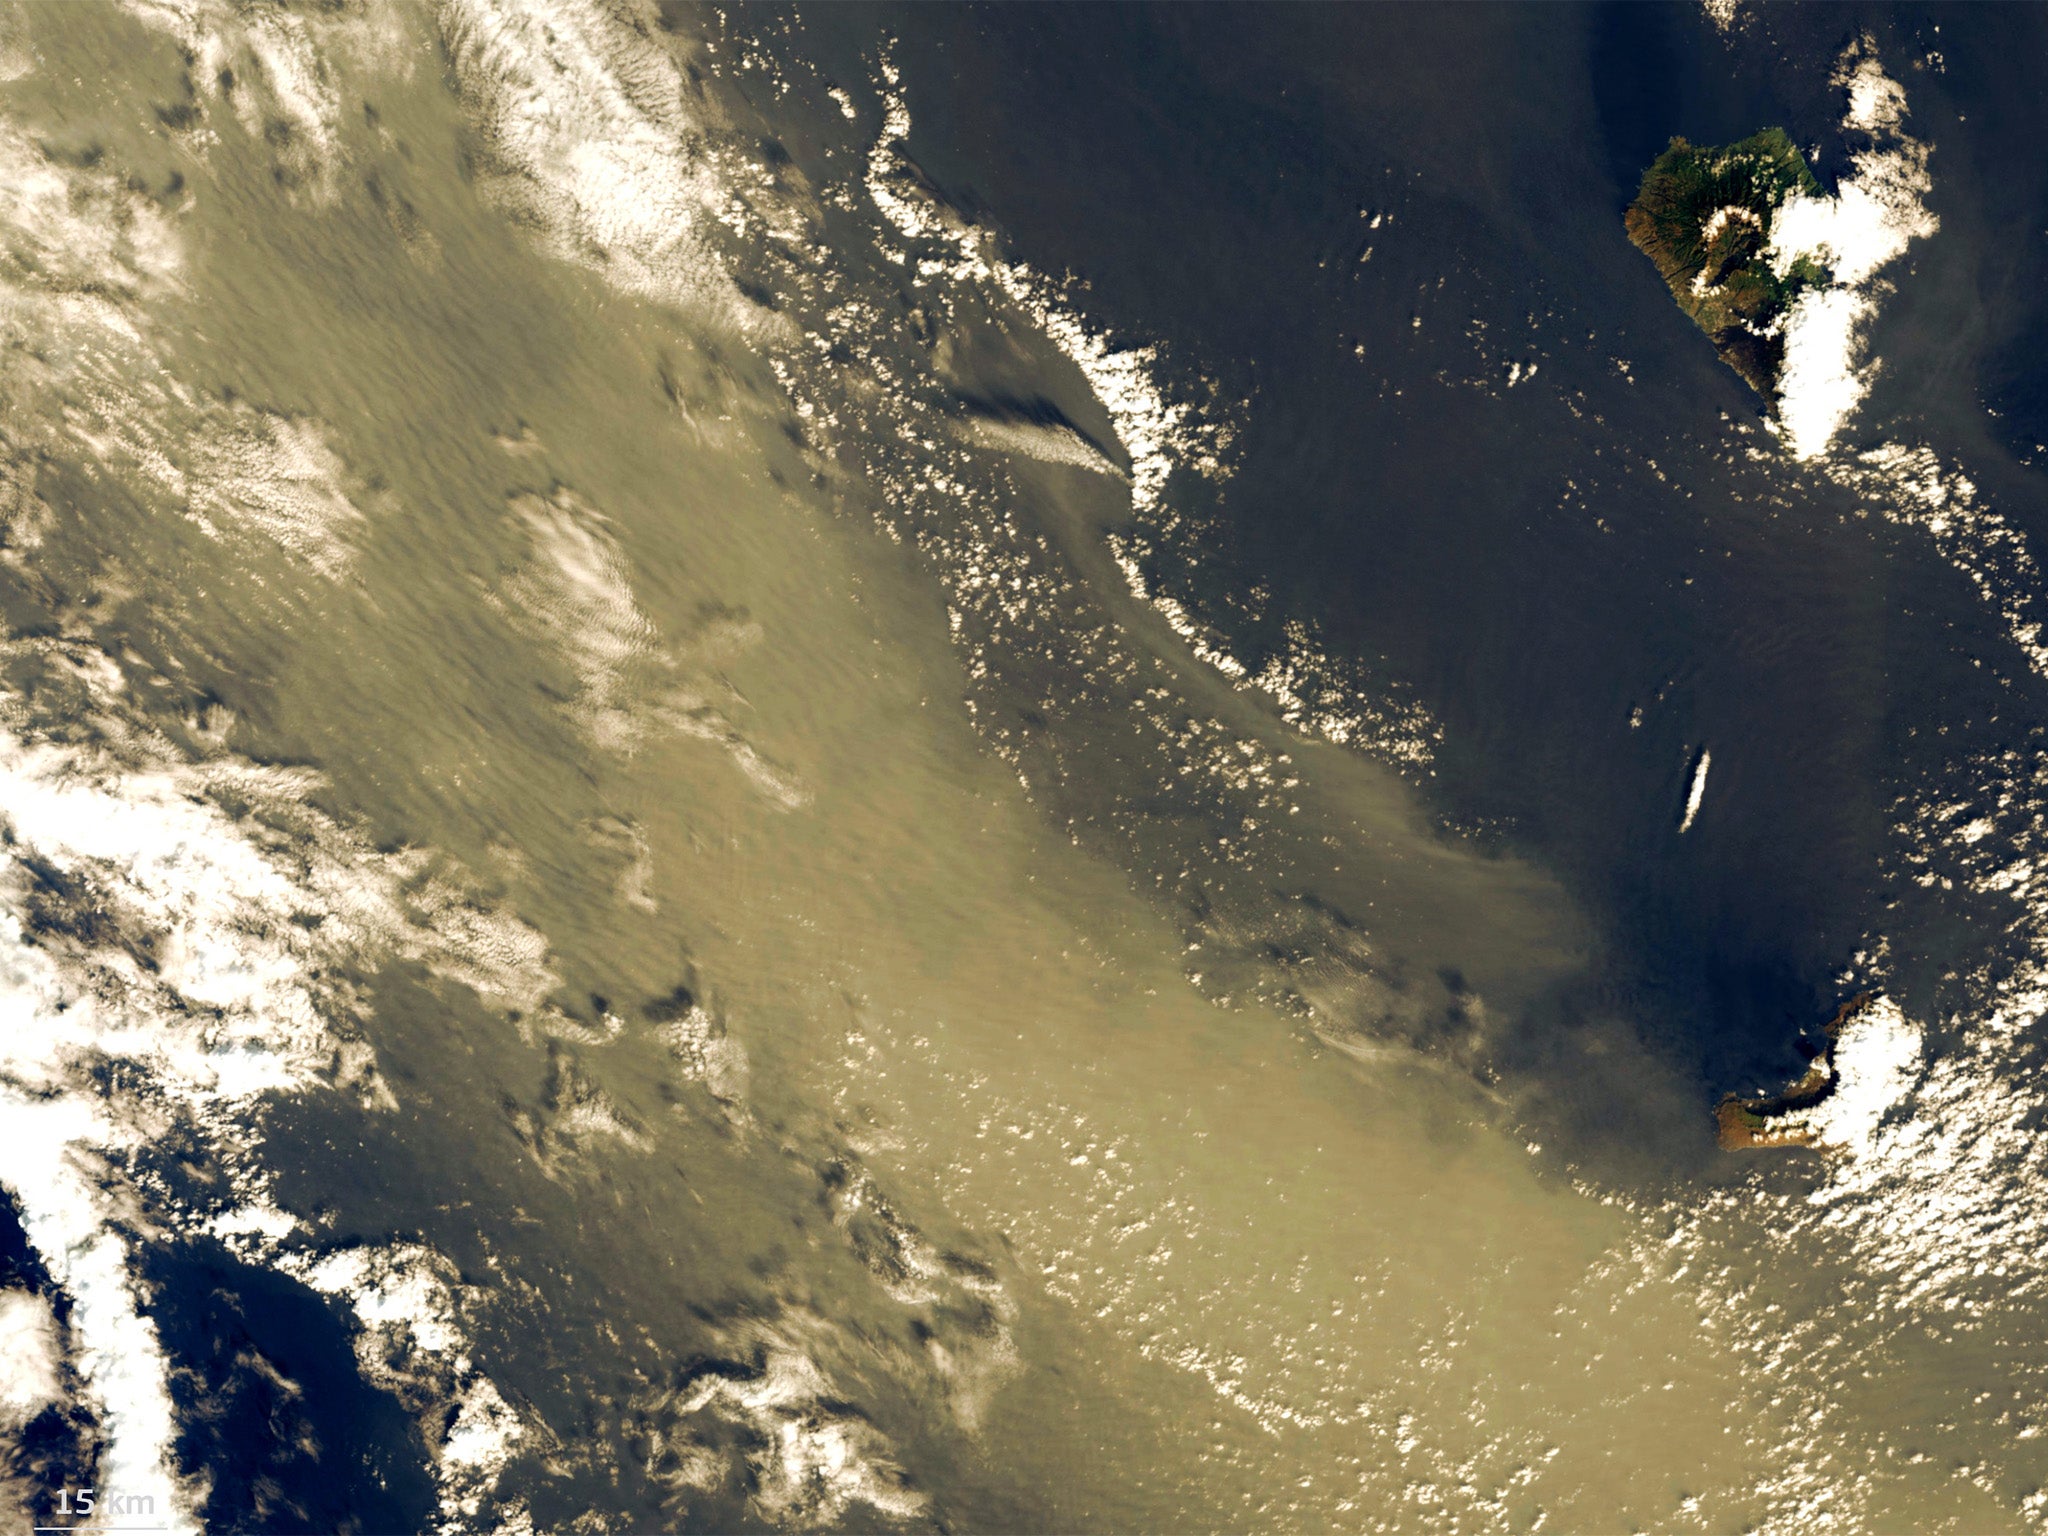 Saharan dust flows past La Palma (top right) in the Canary Islands